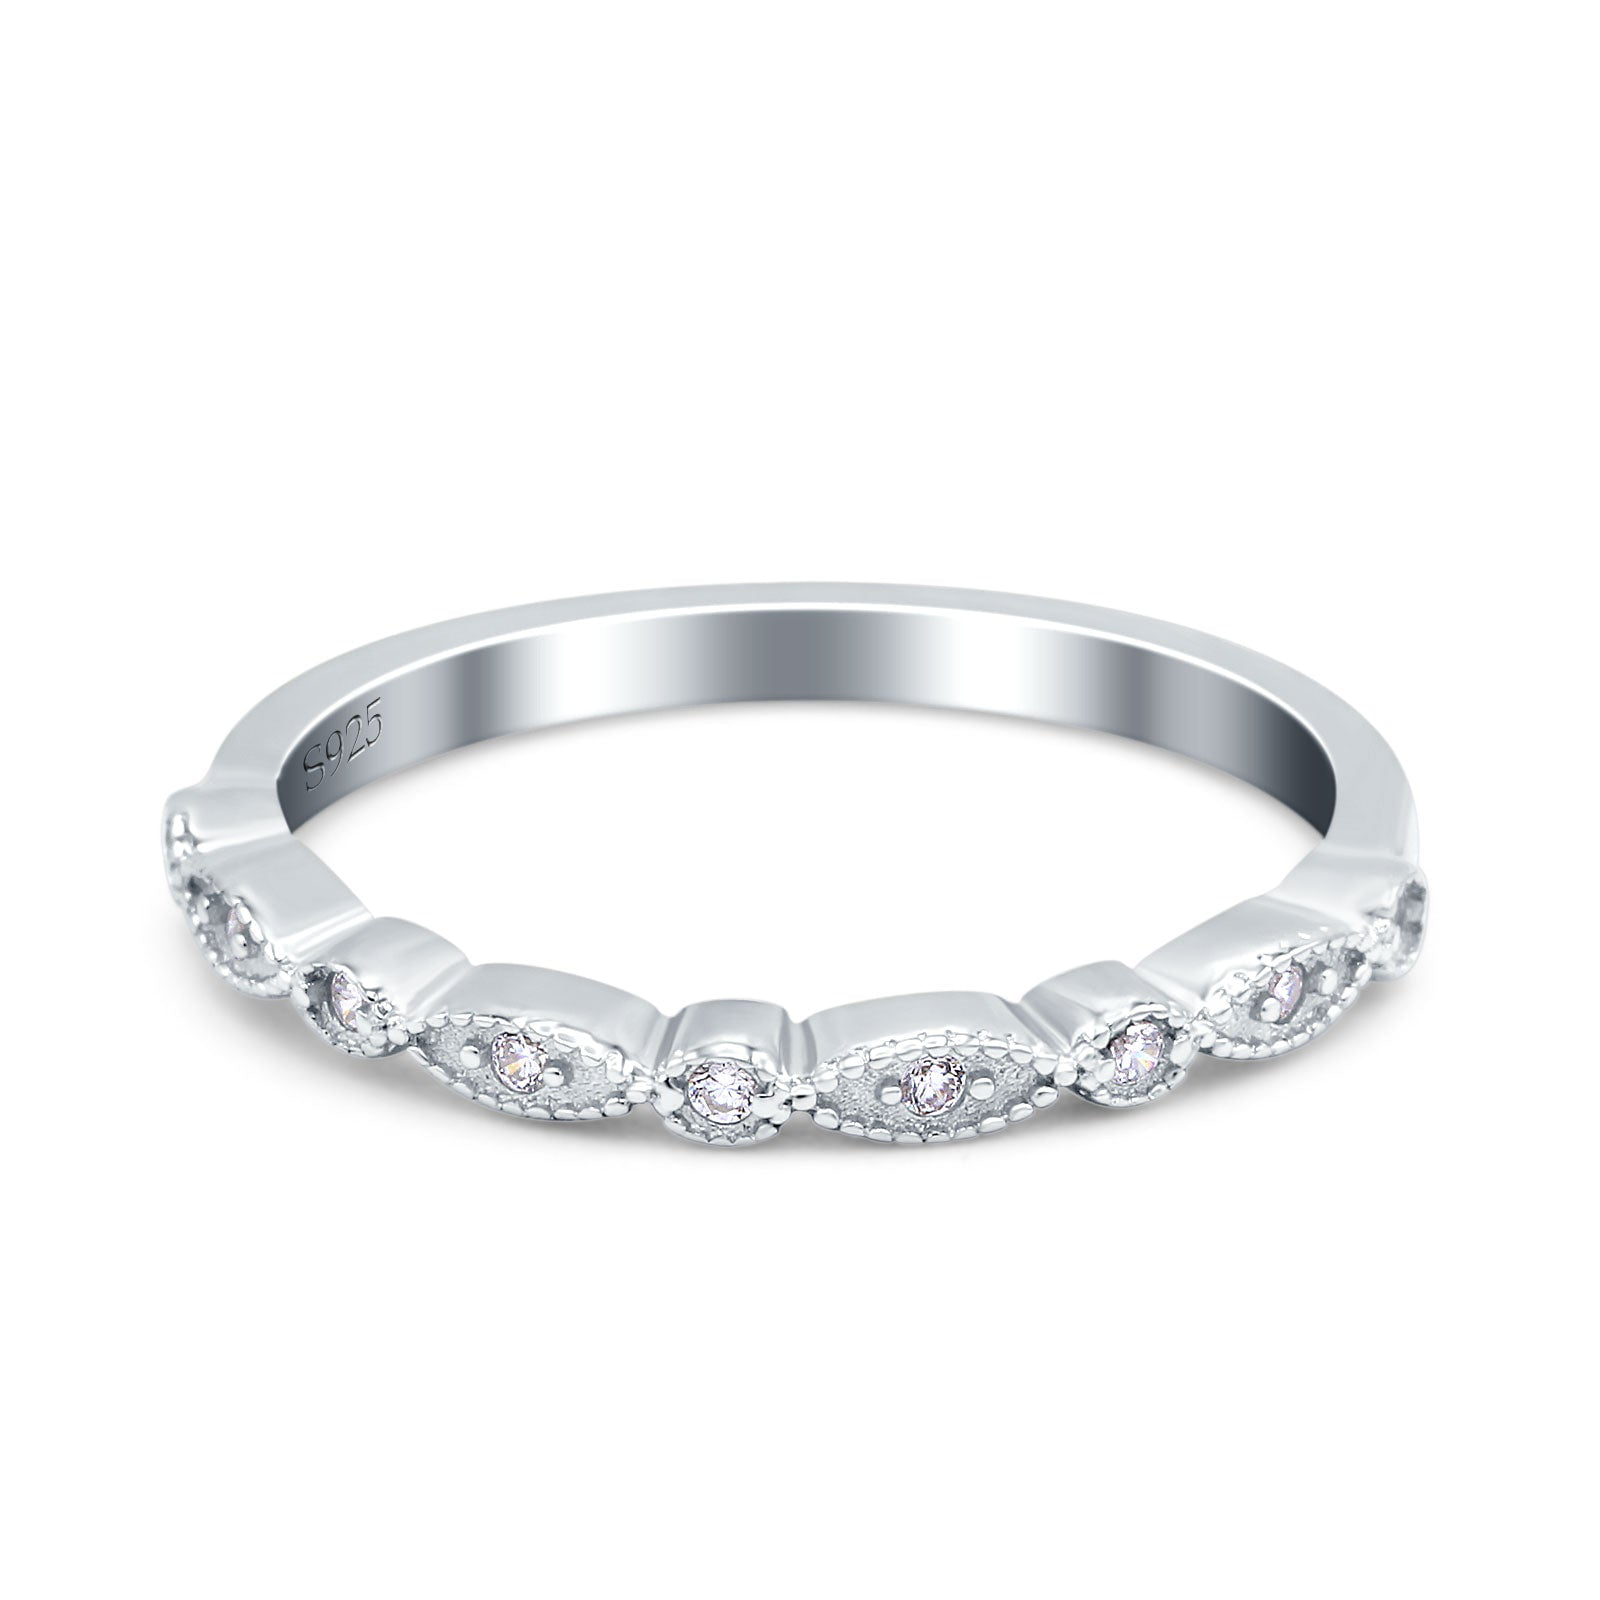 CHIC 18K WHITE GOLD PLATED CZ CUBIC ZIRCONIA ETERNITY WEDDING BAND RING SIZE10 